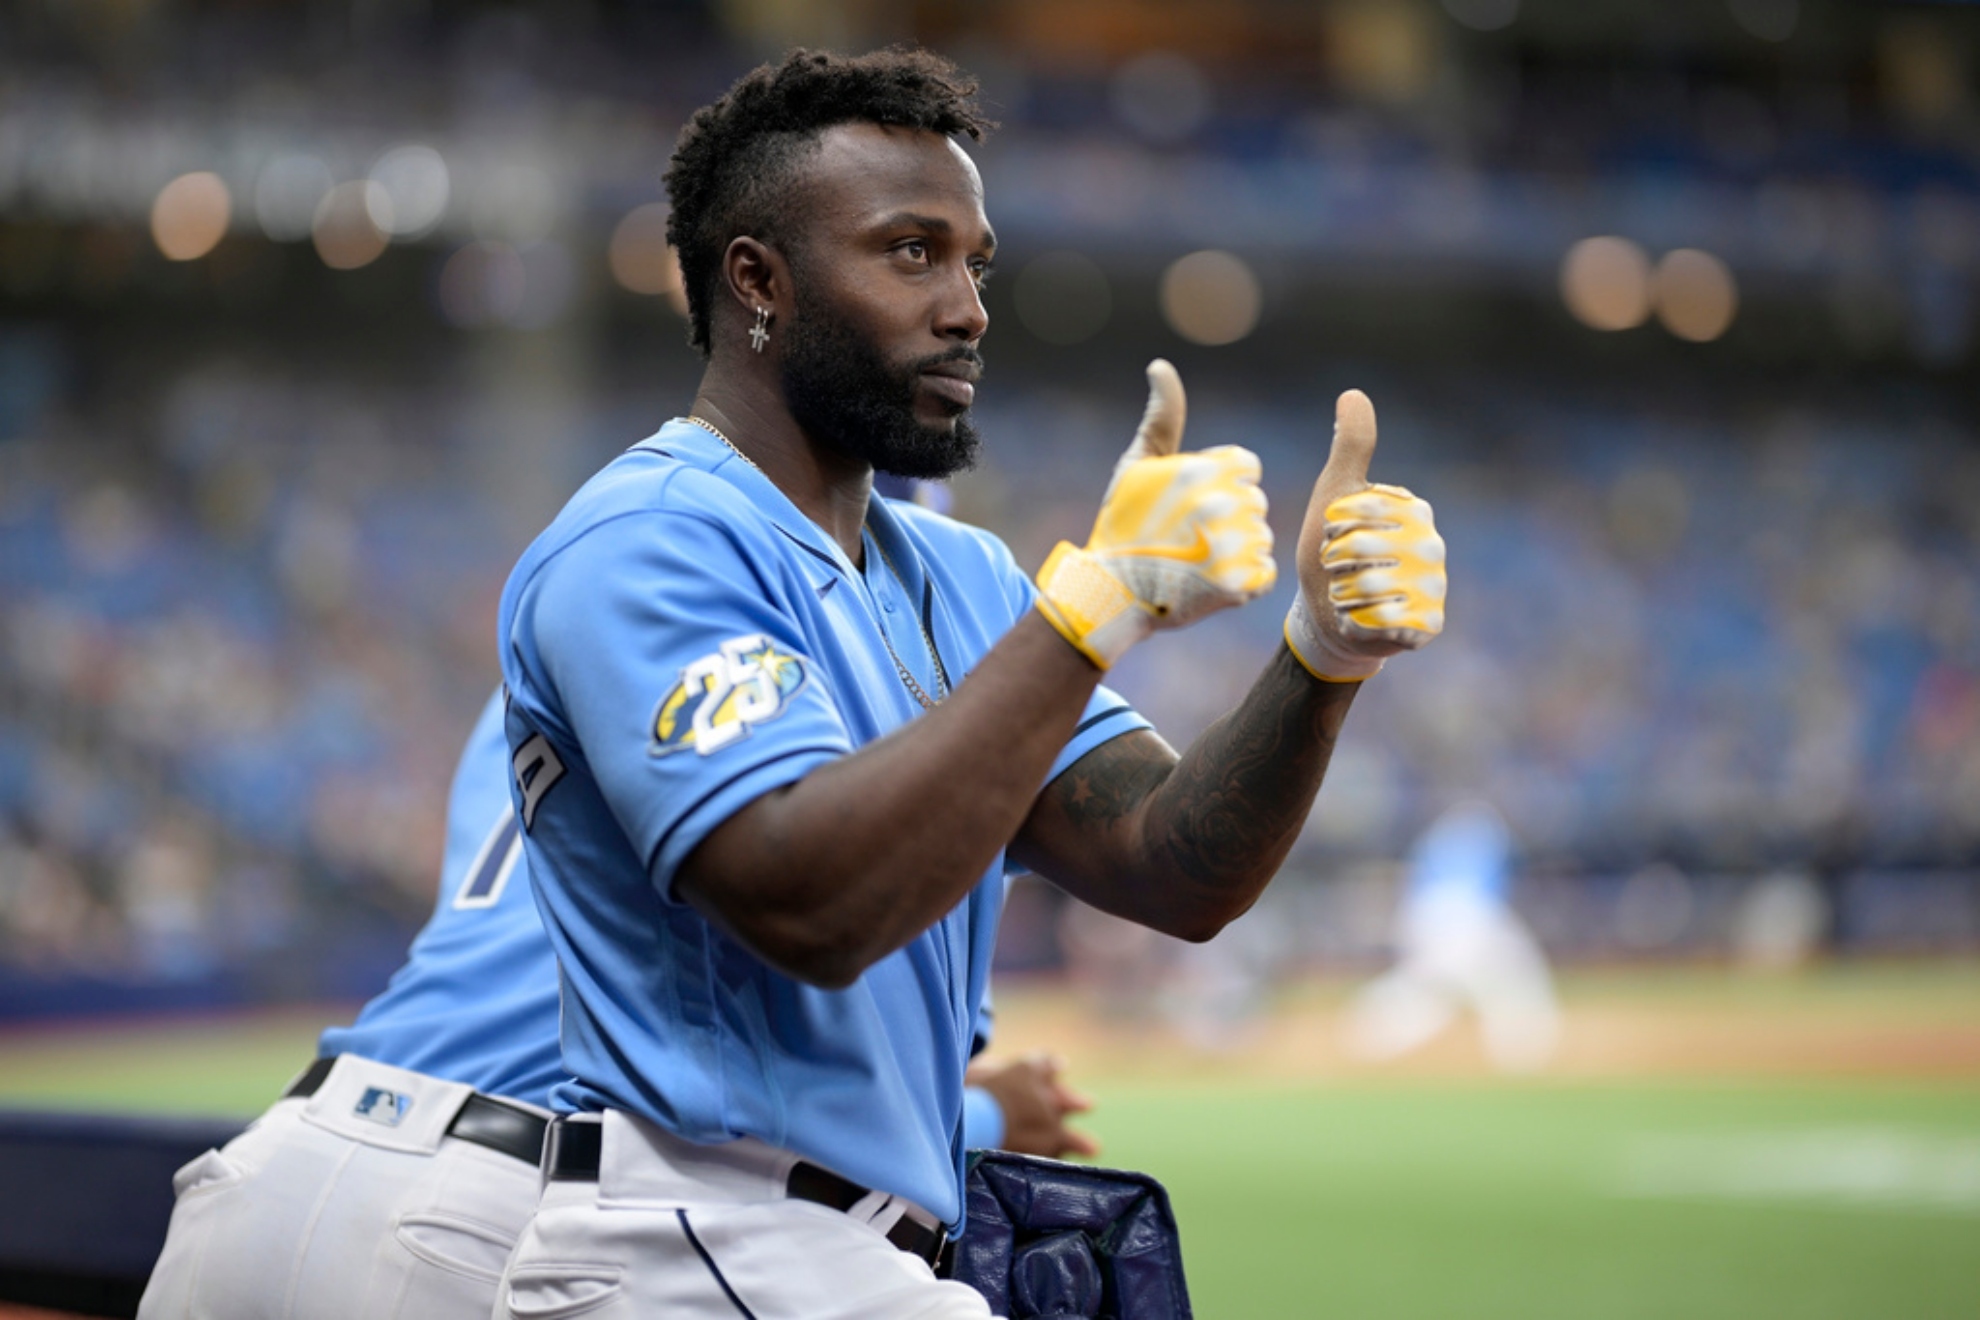 Arozarena homers again keeping Tampa Bay Rays as the only undefeated team in the MLB